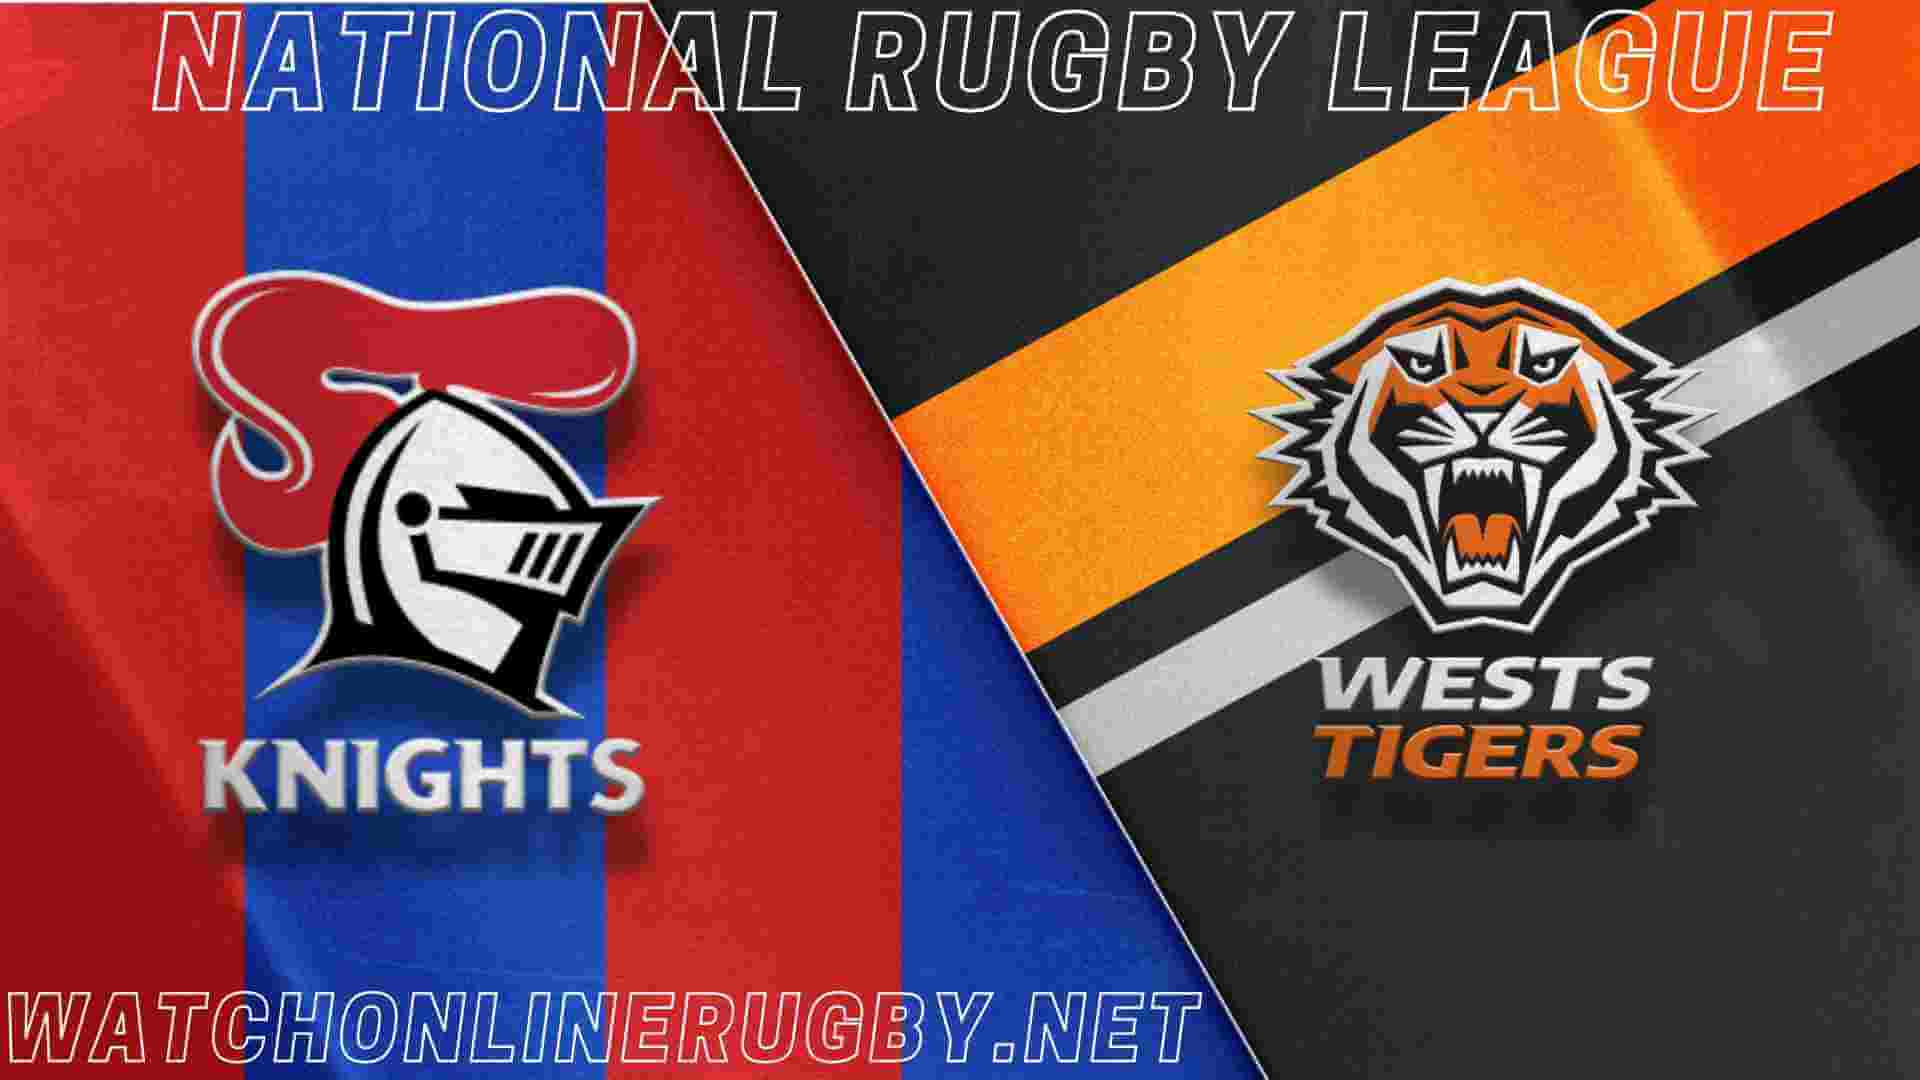 Knights VS Wests Tigers 2018 Live Streaming